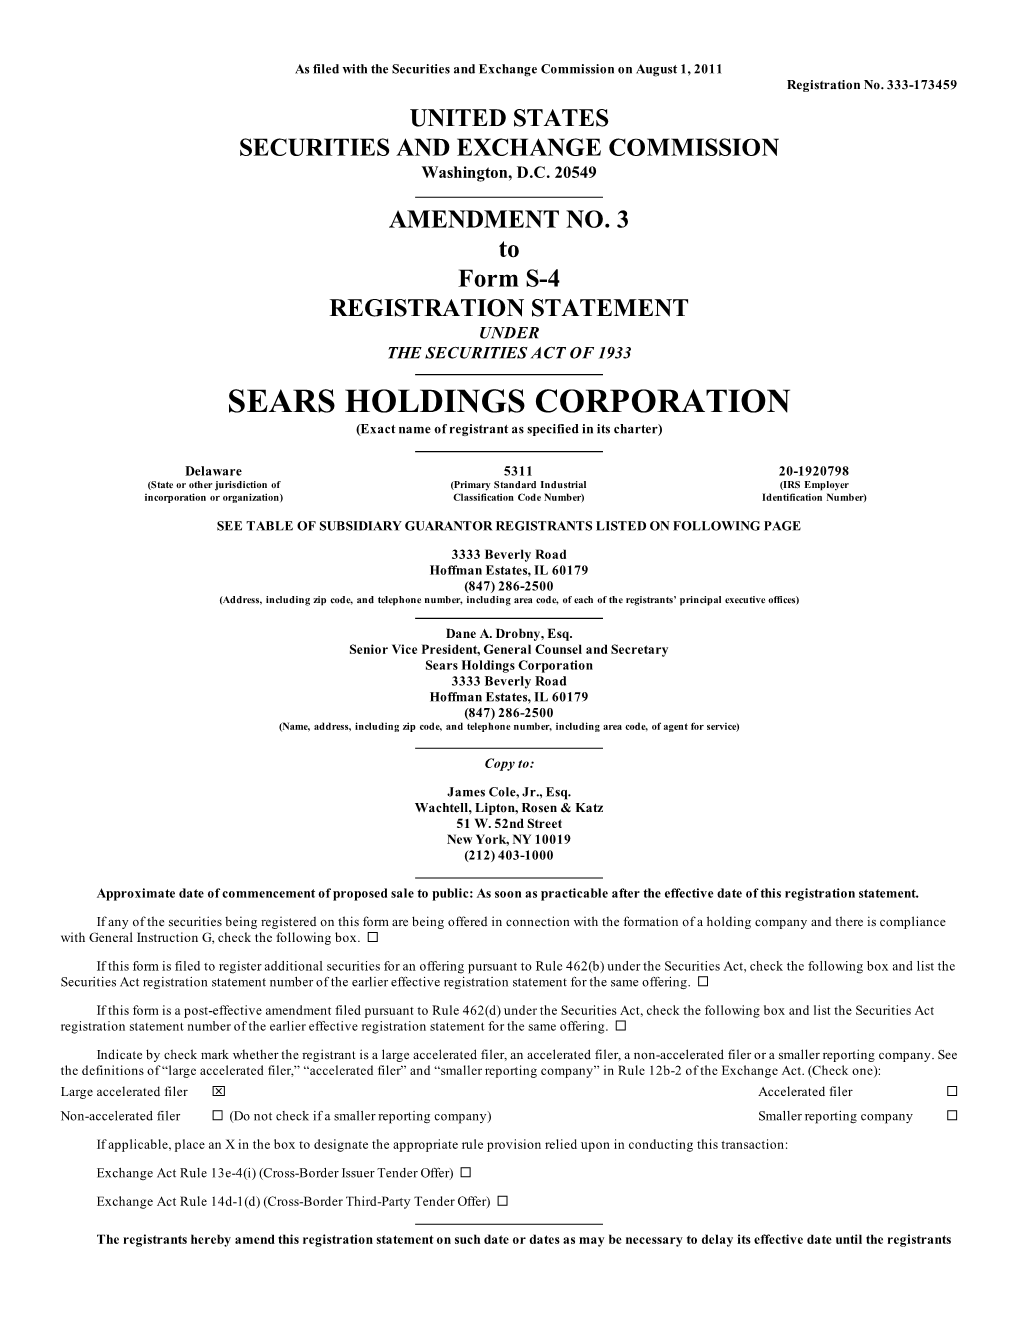 SEARS HOLDINGS CORPORATION (Exact Name of Registrant As Specified in Its Charter)